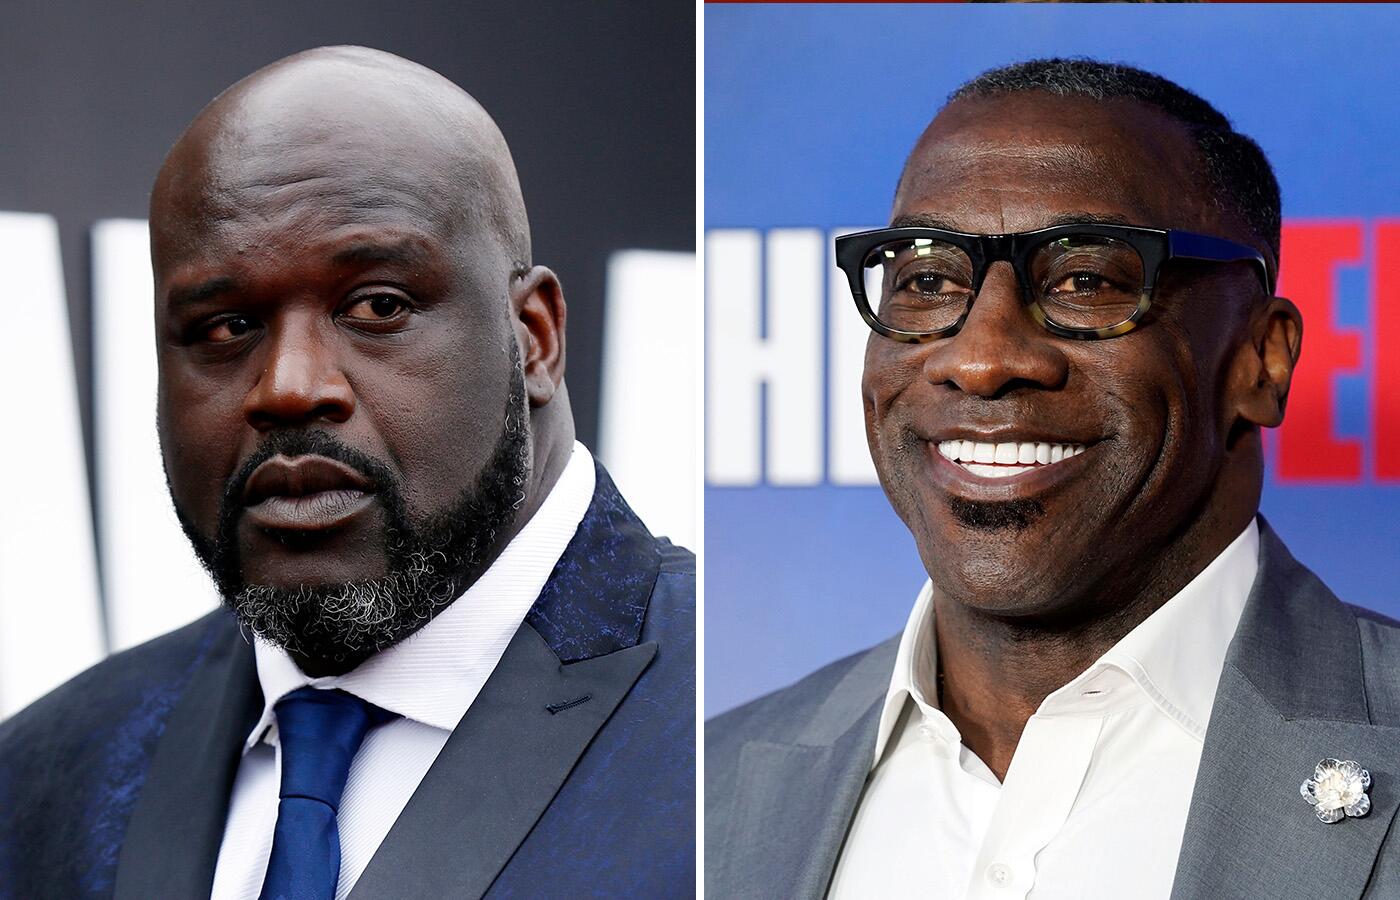 Shaquille O'Neal-Shannon Sharpe beef reaches diss track level. Here's how we got here